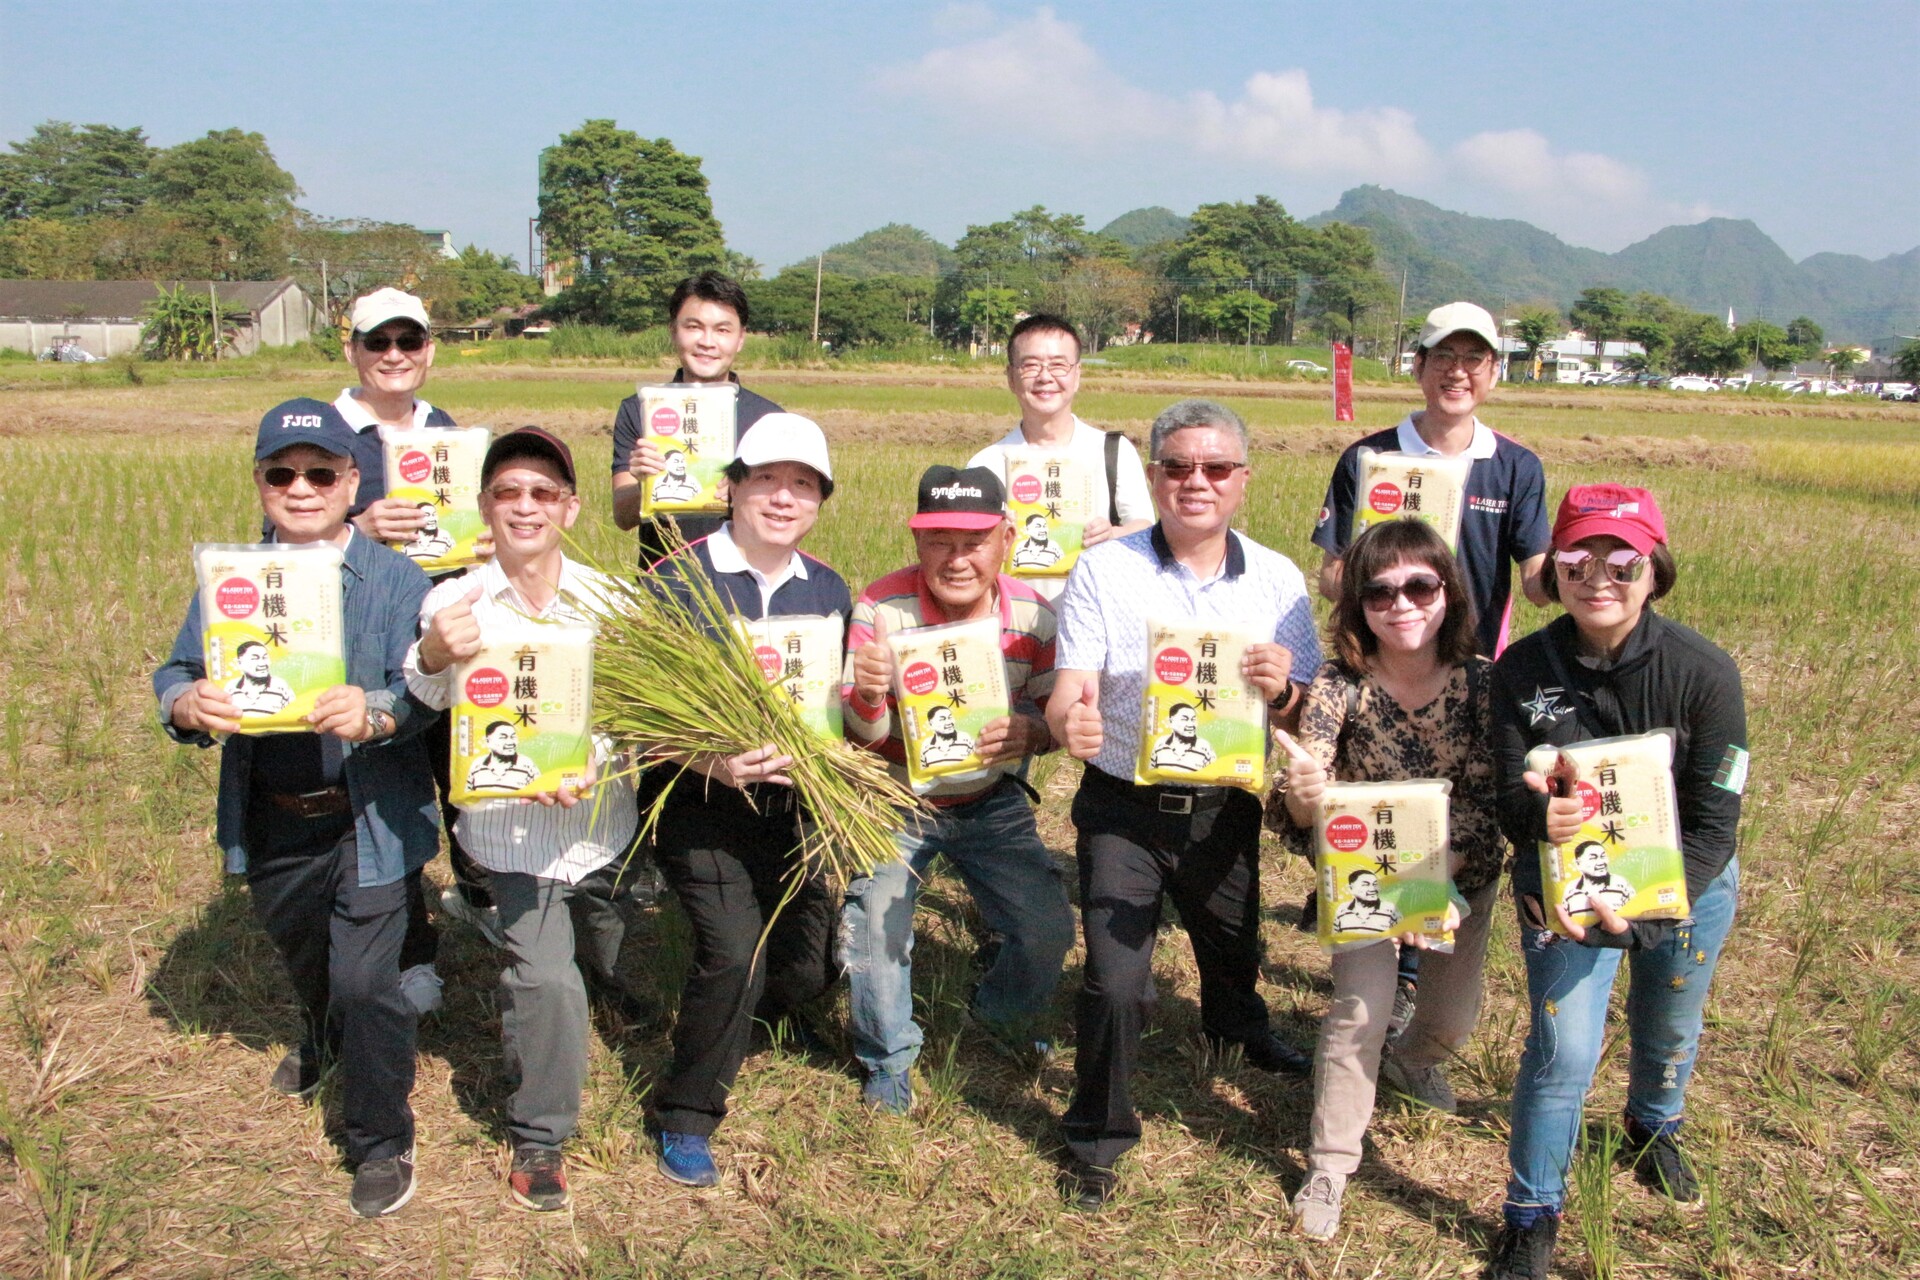 The university connects enterprises and cooperates with local organic farmers to harvest rice together. Front row from the second to the left: Associate Dean of the College of Management Jui-kun Kuo, Laser Tek Chairman of the Board Tsai-hsing Cheng, and Chia-cheng Chen of Ri-pin Organic Rice. Back row, from left to right: Laser Tek General Manager Meng-i Huang, NSYSU’s Institute of Public Affairs Management instructor Sheng-yuan Wang, Kaohsiung Philharmonic Cultural and Arts Foundation CEO Hung-chang Chu, Laser Tek Vice President Hsueh-i Hsiung.